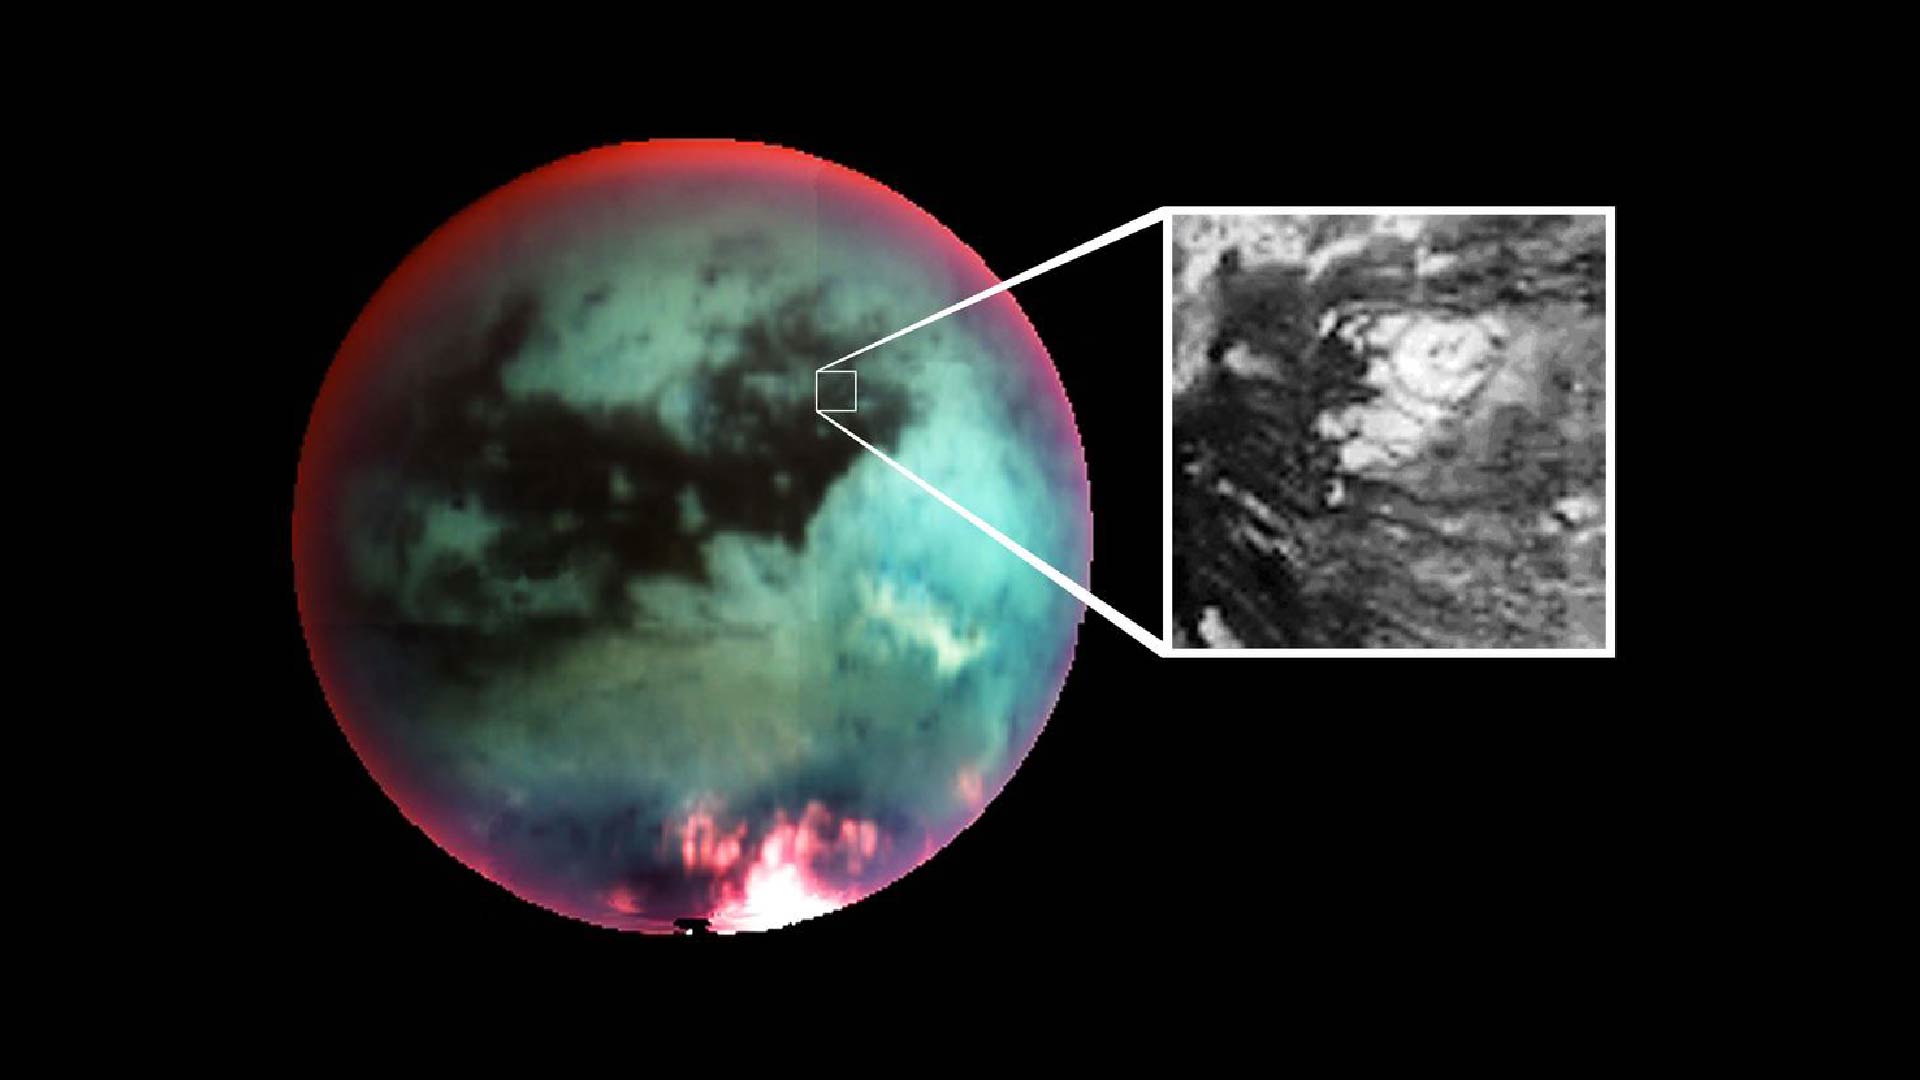 An image of Titan. It is teal blue with a ring of red around the perimeter. The image also has an inset zoomed in view in black and white of a volcano on the surface.